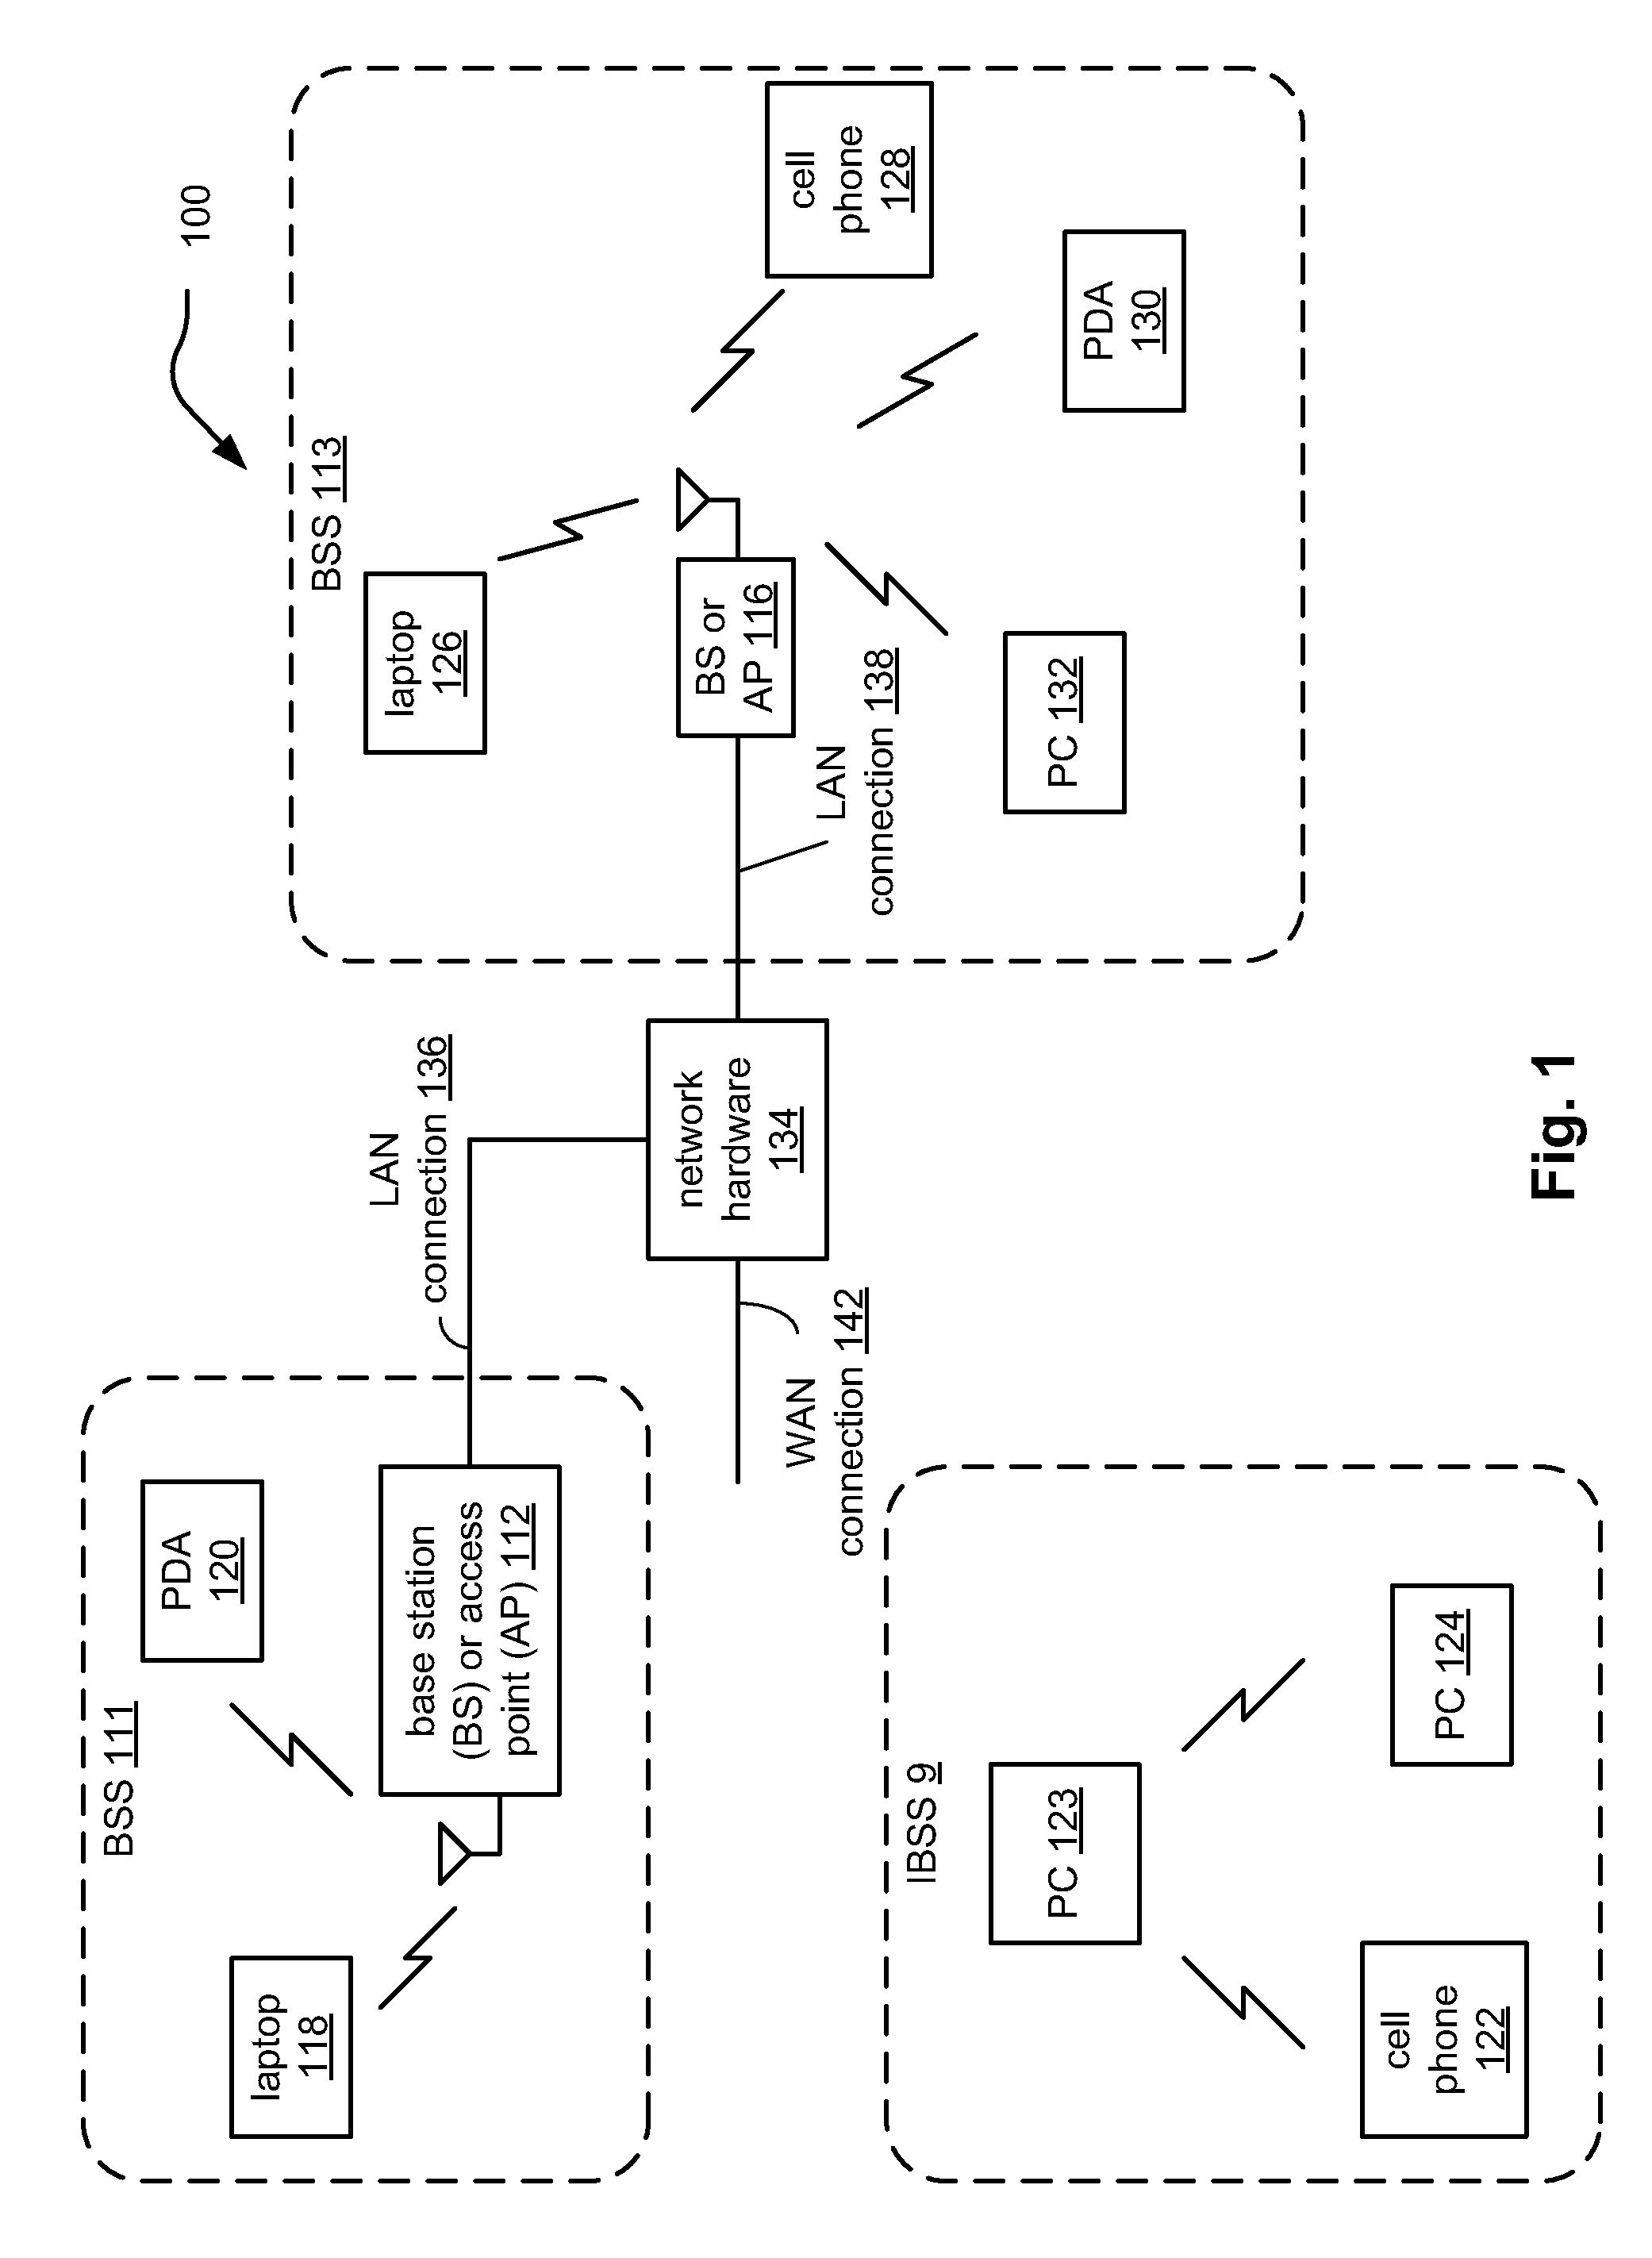 Direct detection of wireless interferers in a communication device for multiple modulation types